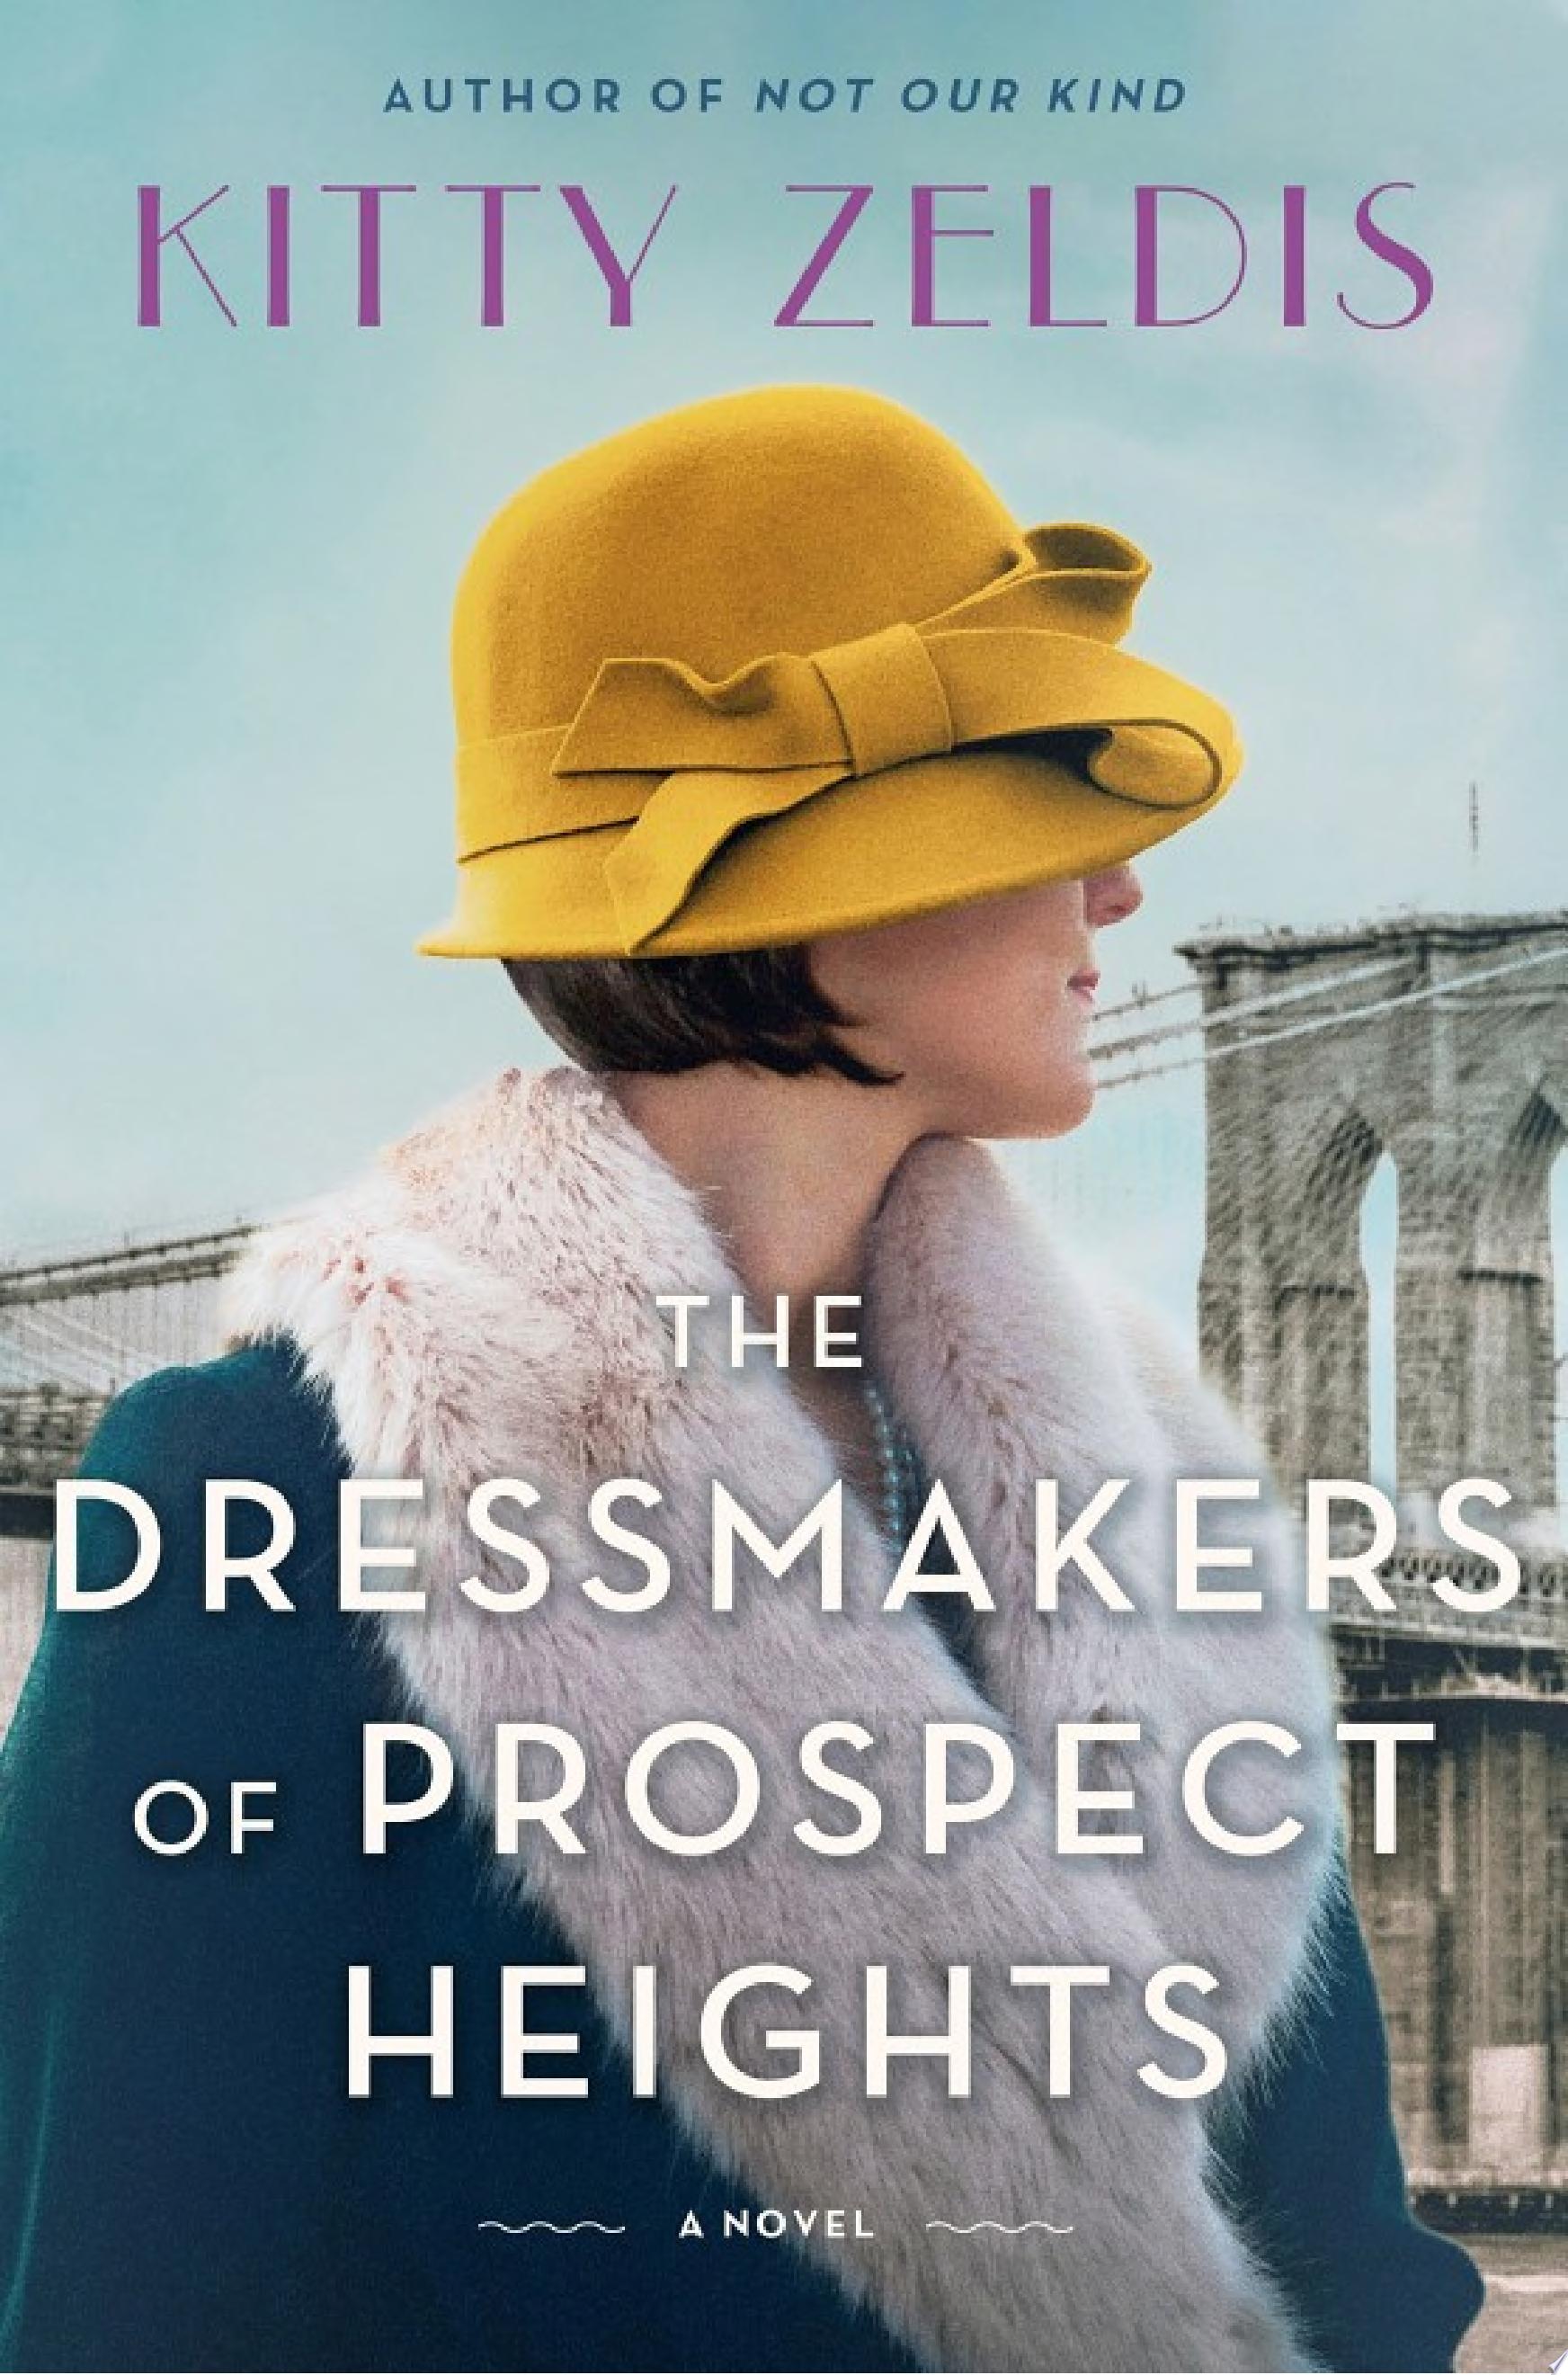 Image for "The Dressmakers of Prospect Heights"